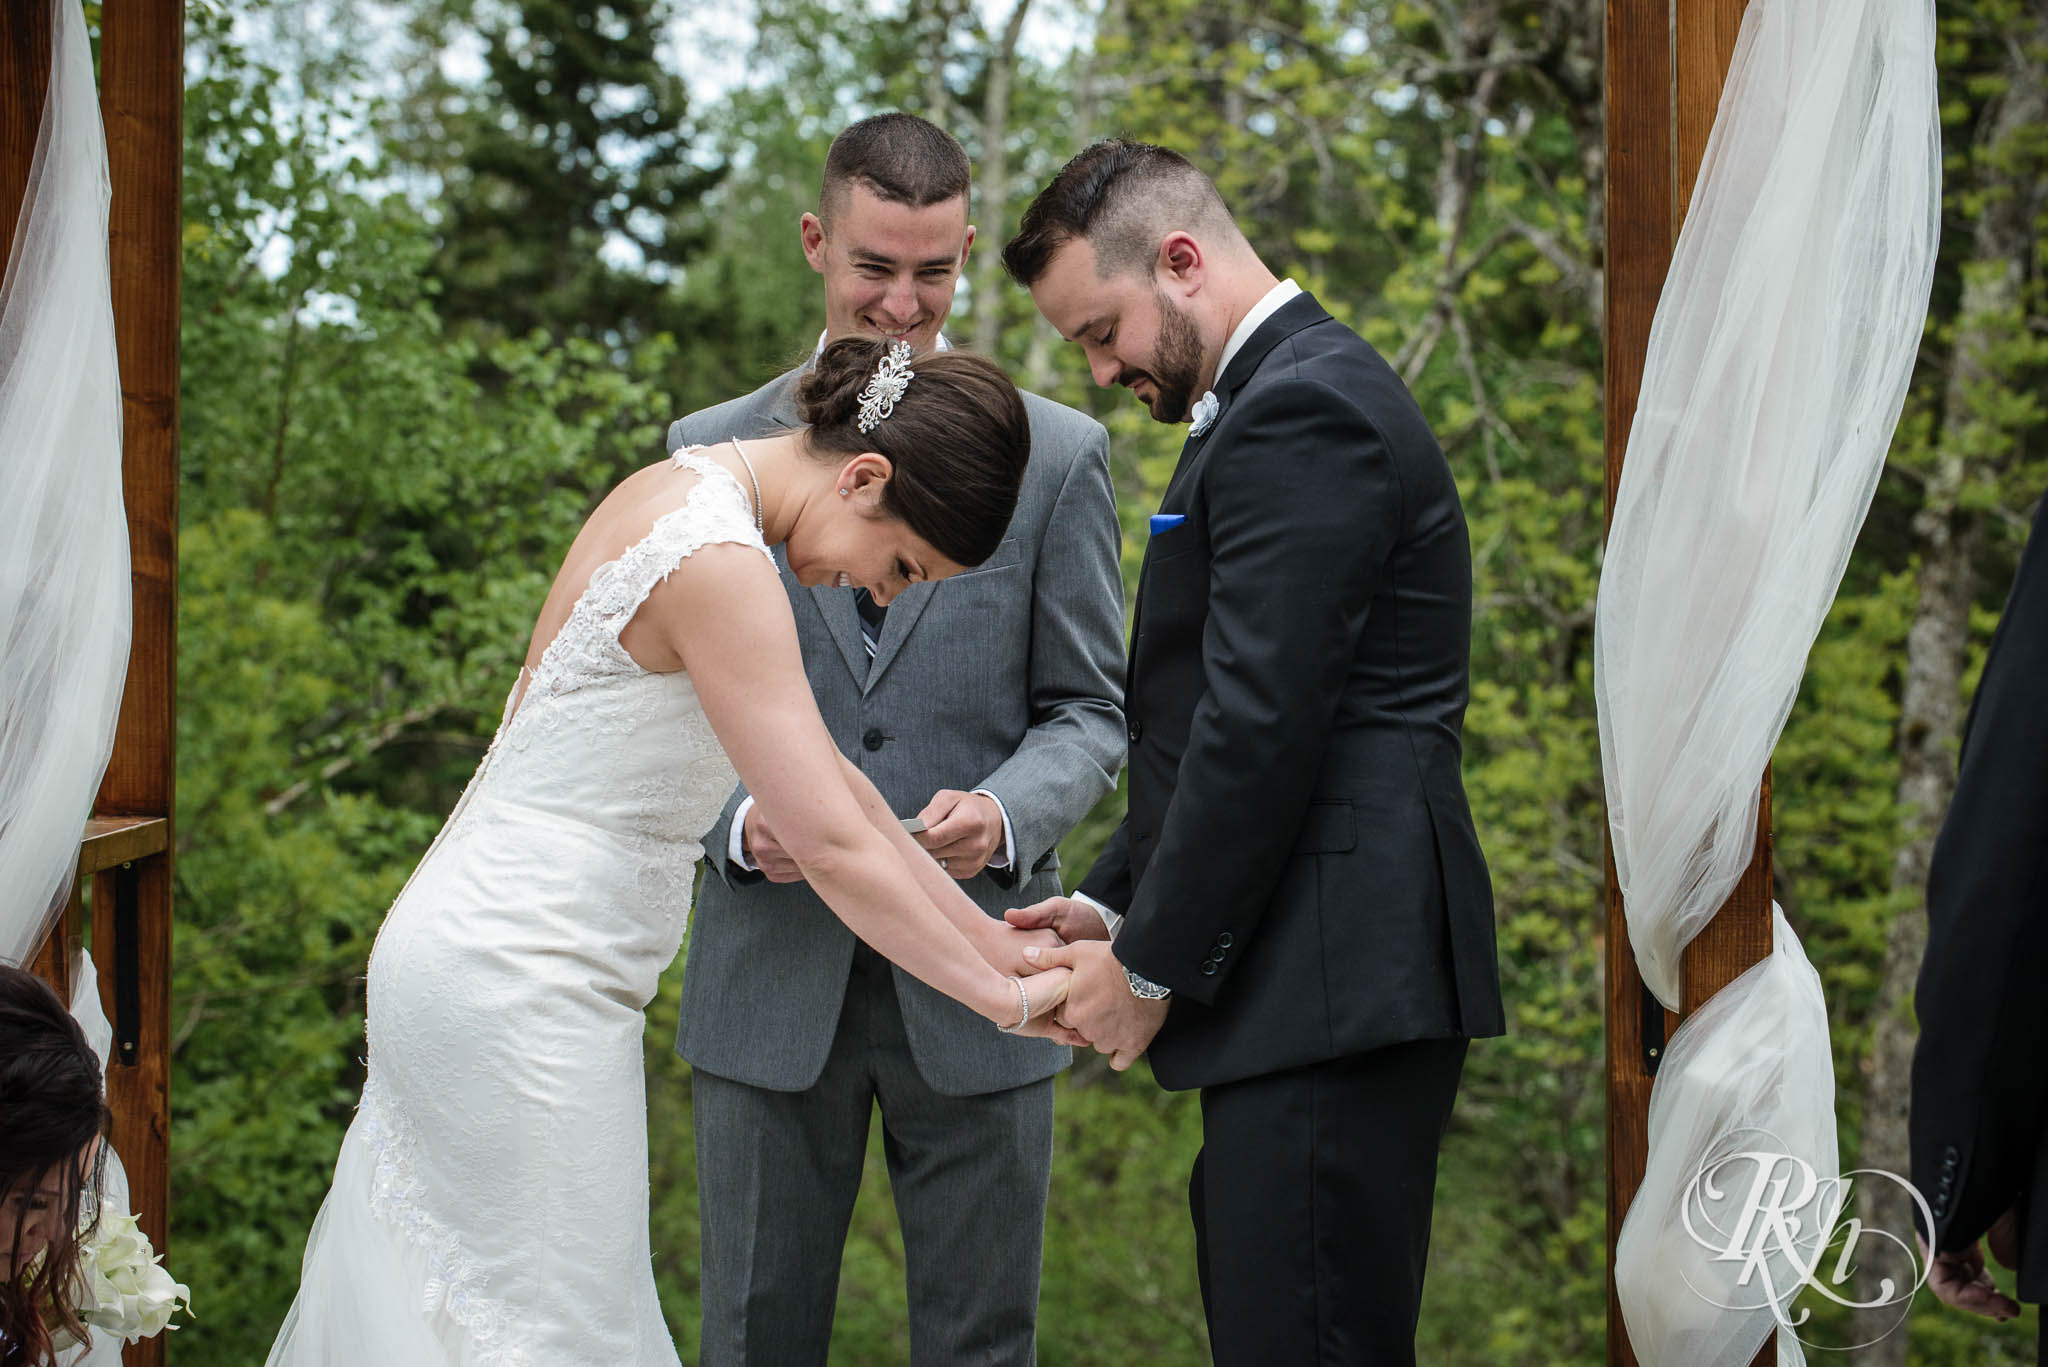 Bride and groom laugh during backyard wedding ceremony in North Shore in Minnesota.